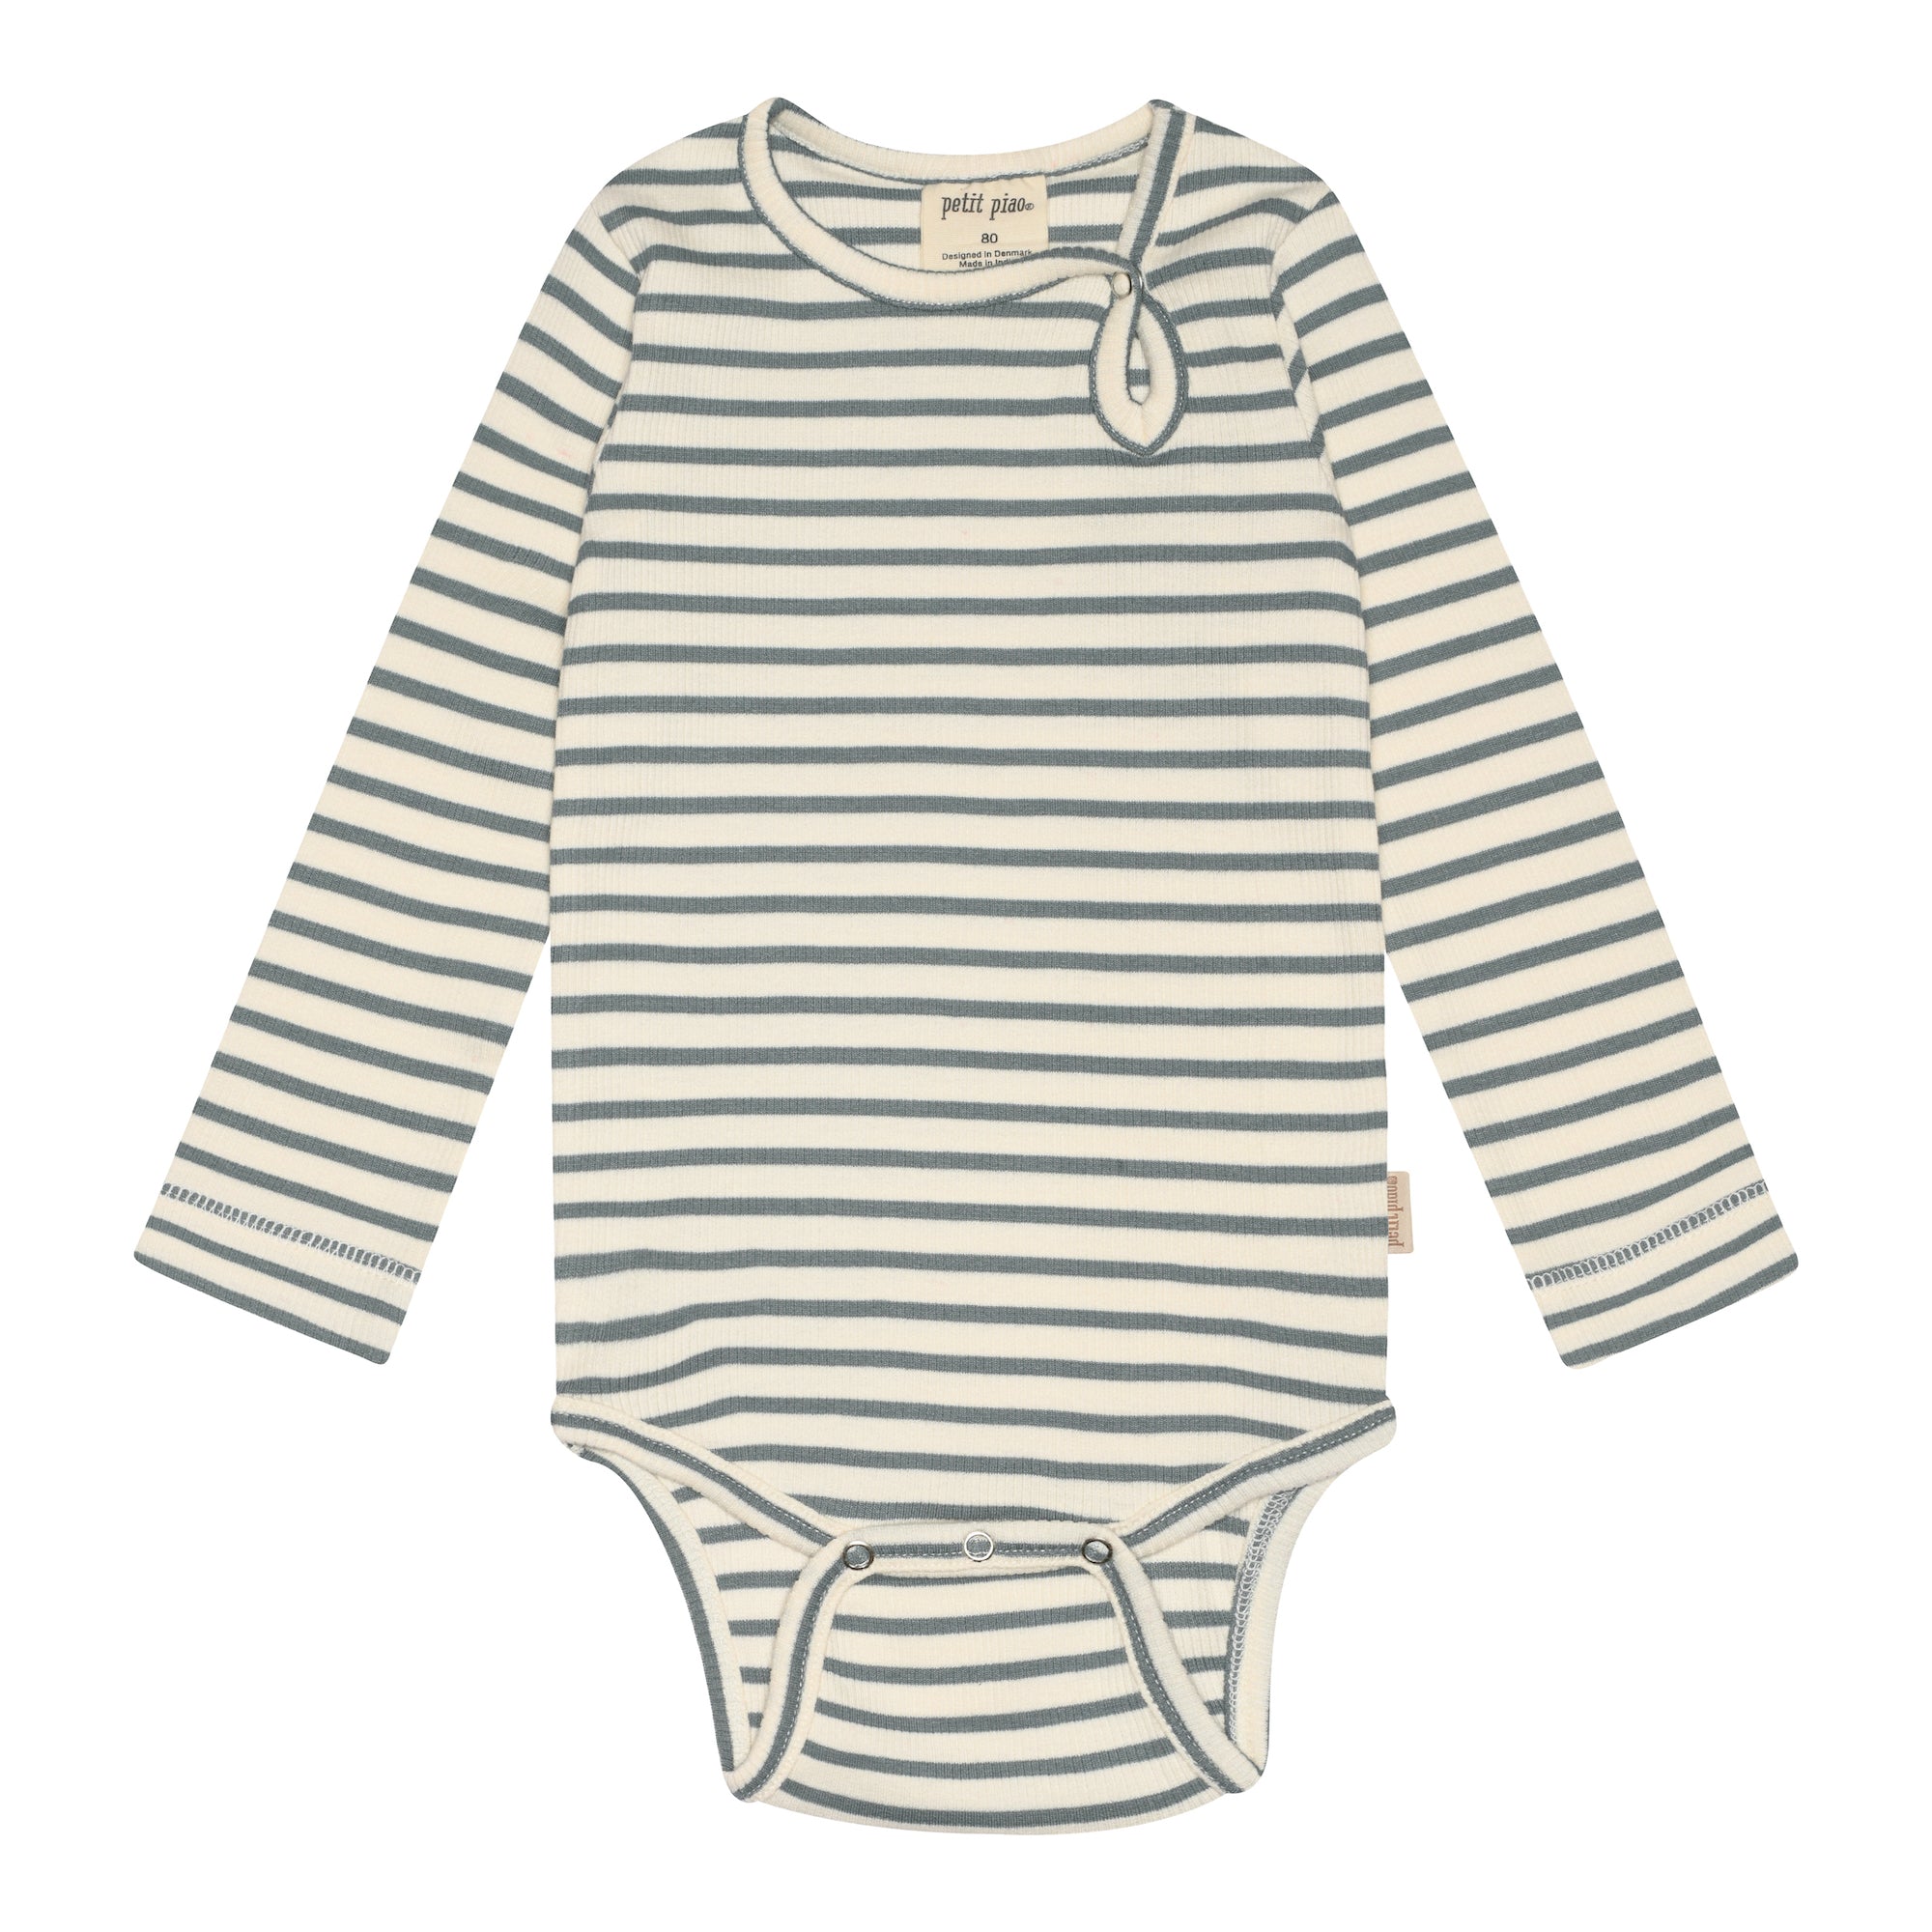 Petit Piao - Body LS Modal Striped, PP301 - Light Petrol / Offwhite